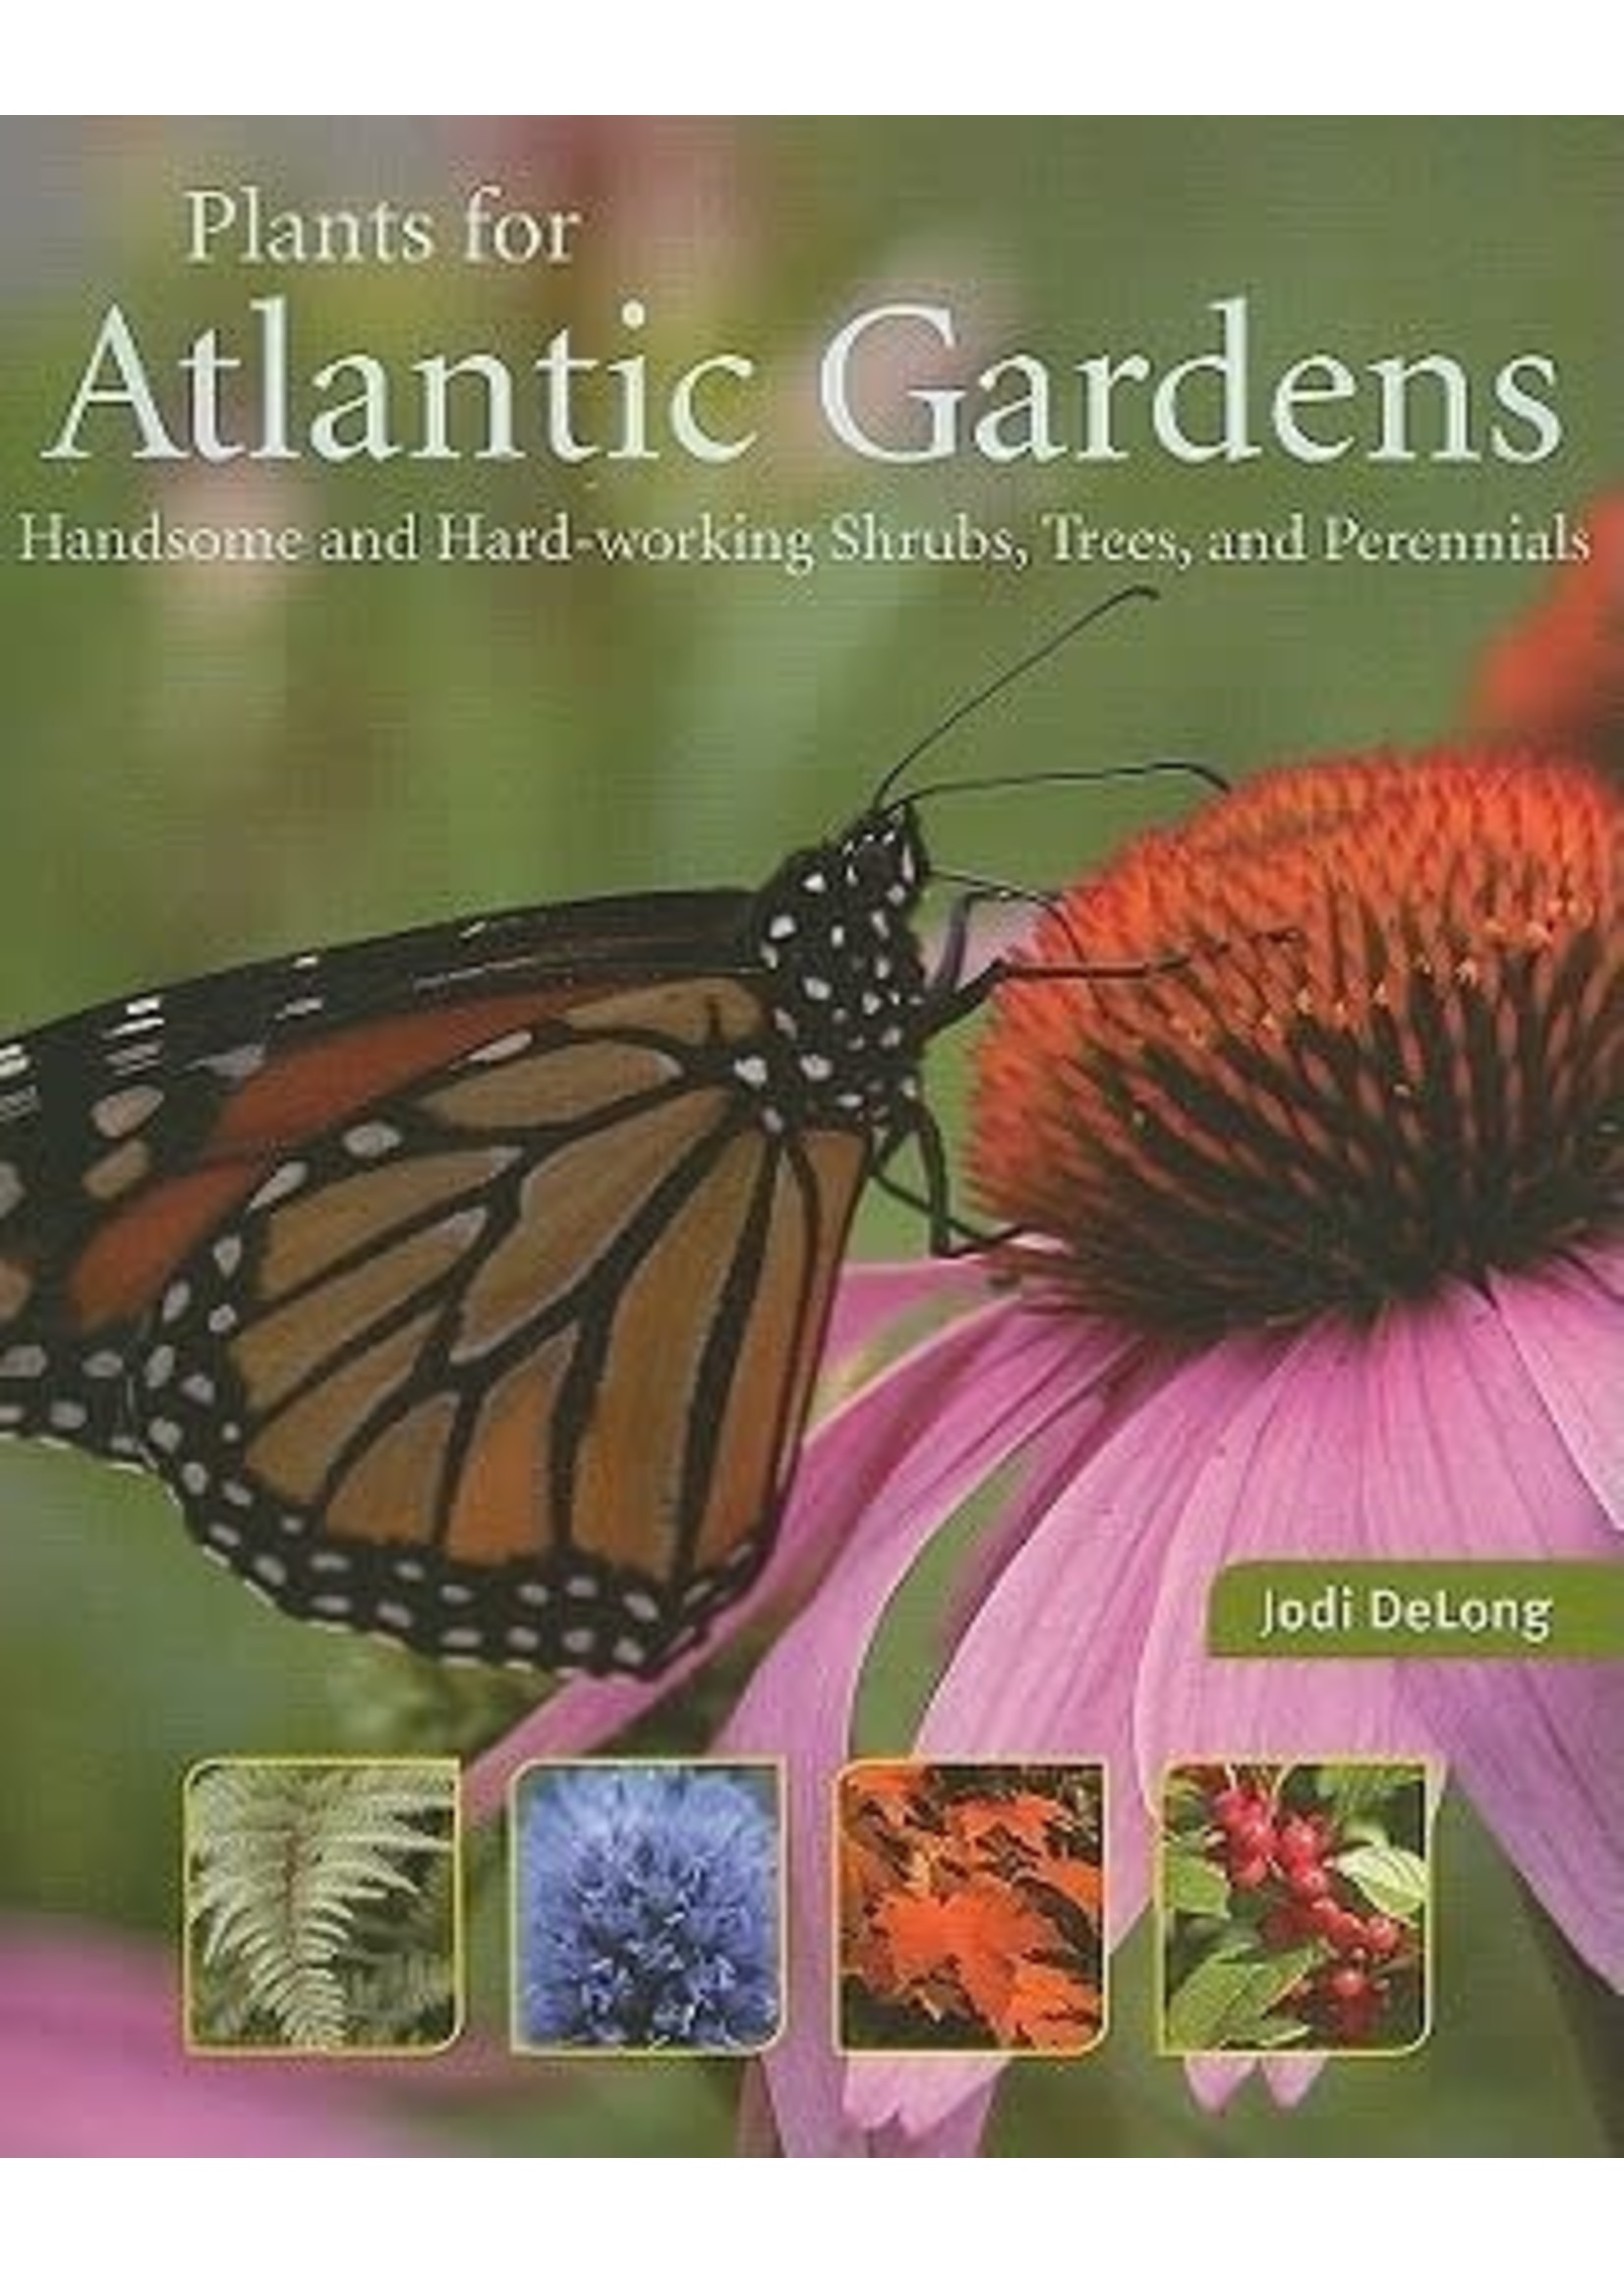 Plants for Atlantic Gardens: Handsome and Hard-Working Shrubs, Trees, and Perennials by Jodi DeLong